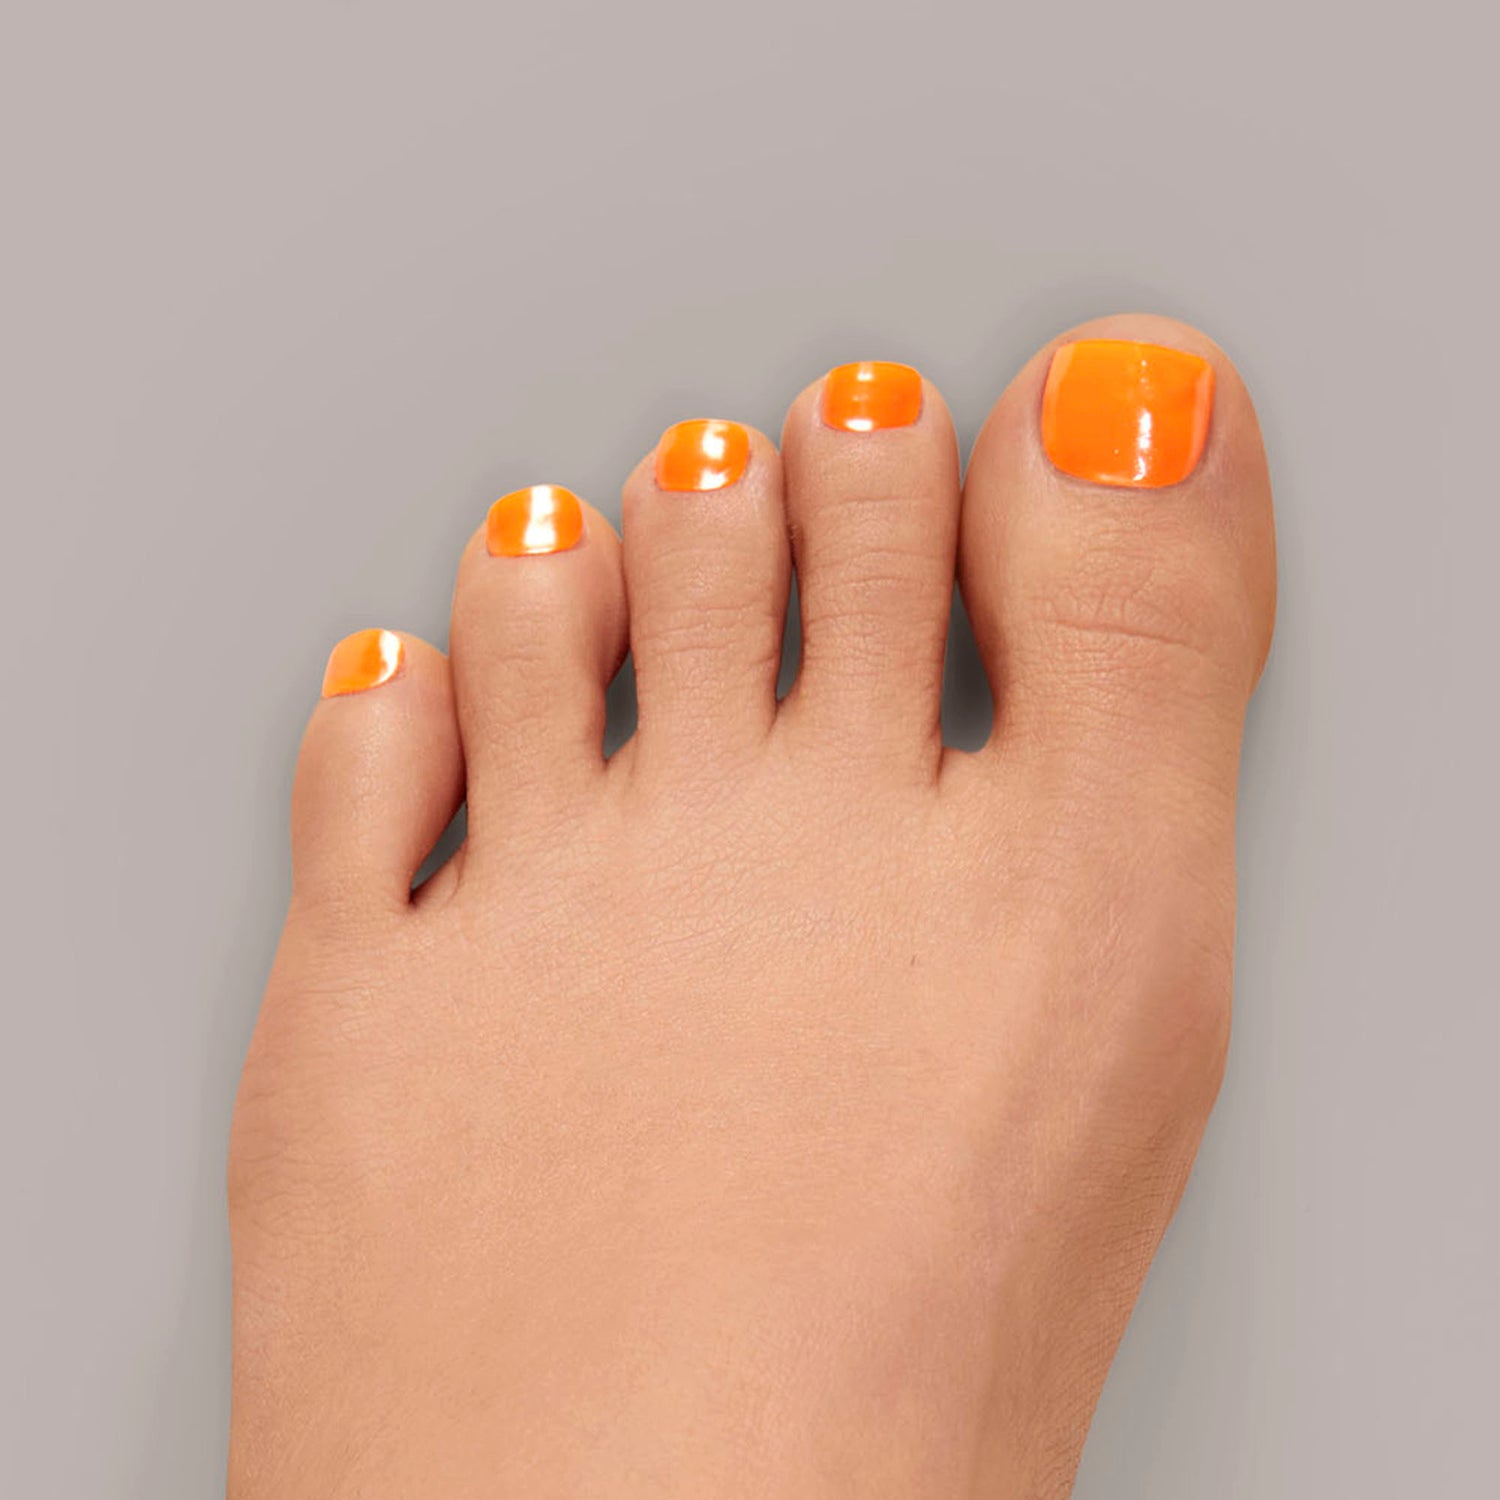 Semi-cured neon orange gel pedicure strips featuring a shimmery chrome finish 